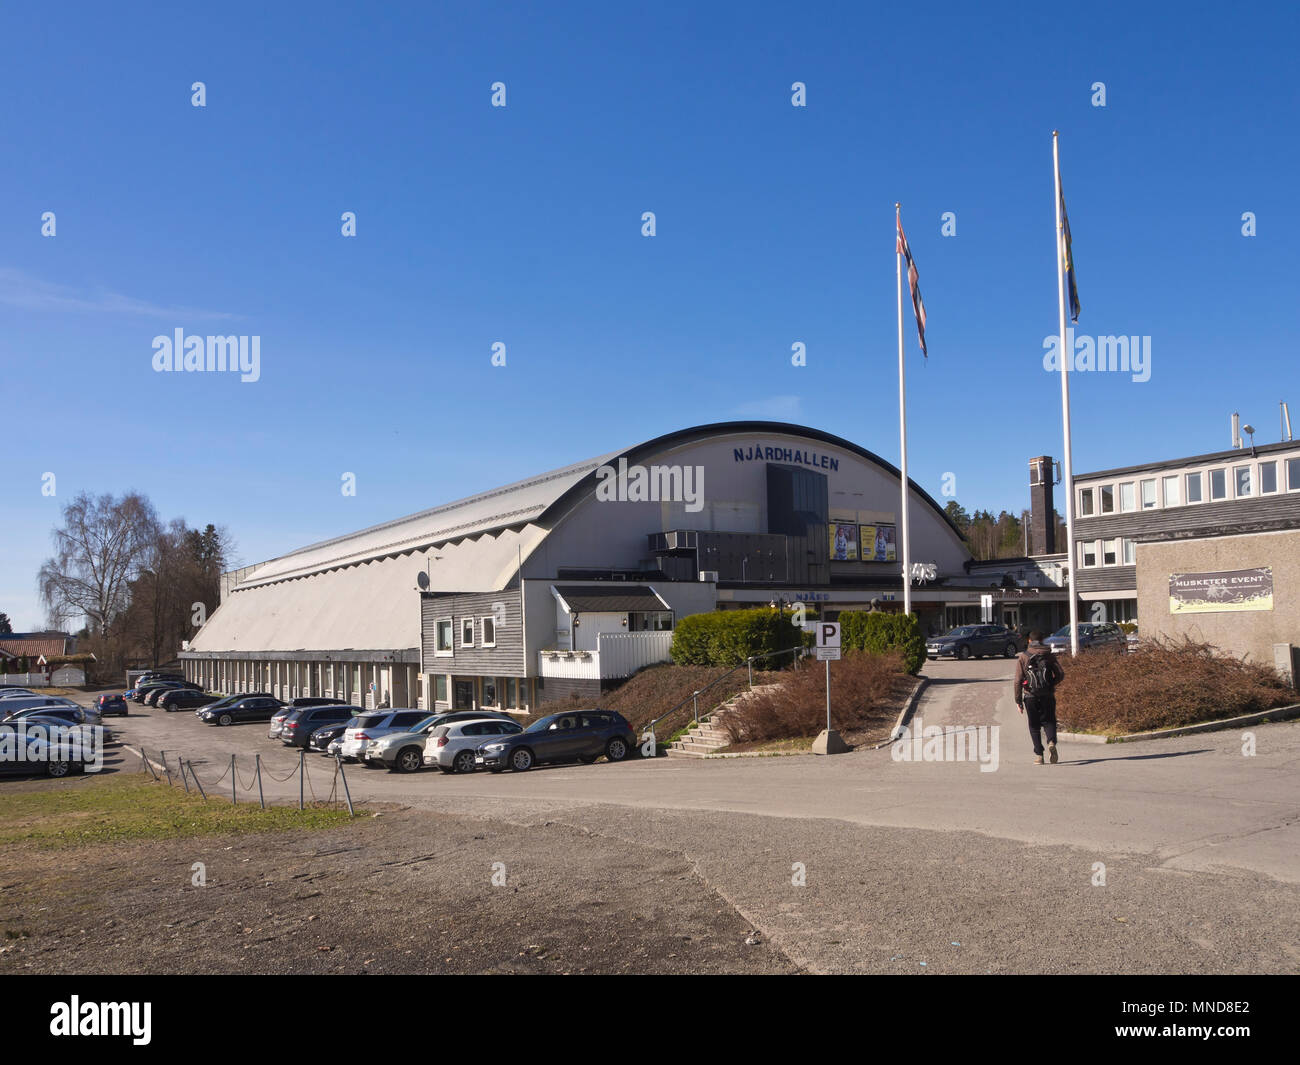 Njårdhallen,an indoor sports arena in the western suburbs of Oslo Norway, used to be a concert arena as well, built ca 1960 Stock Photo